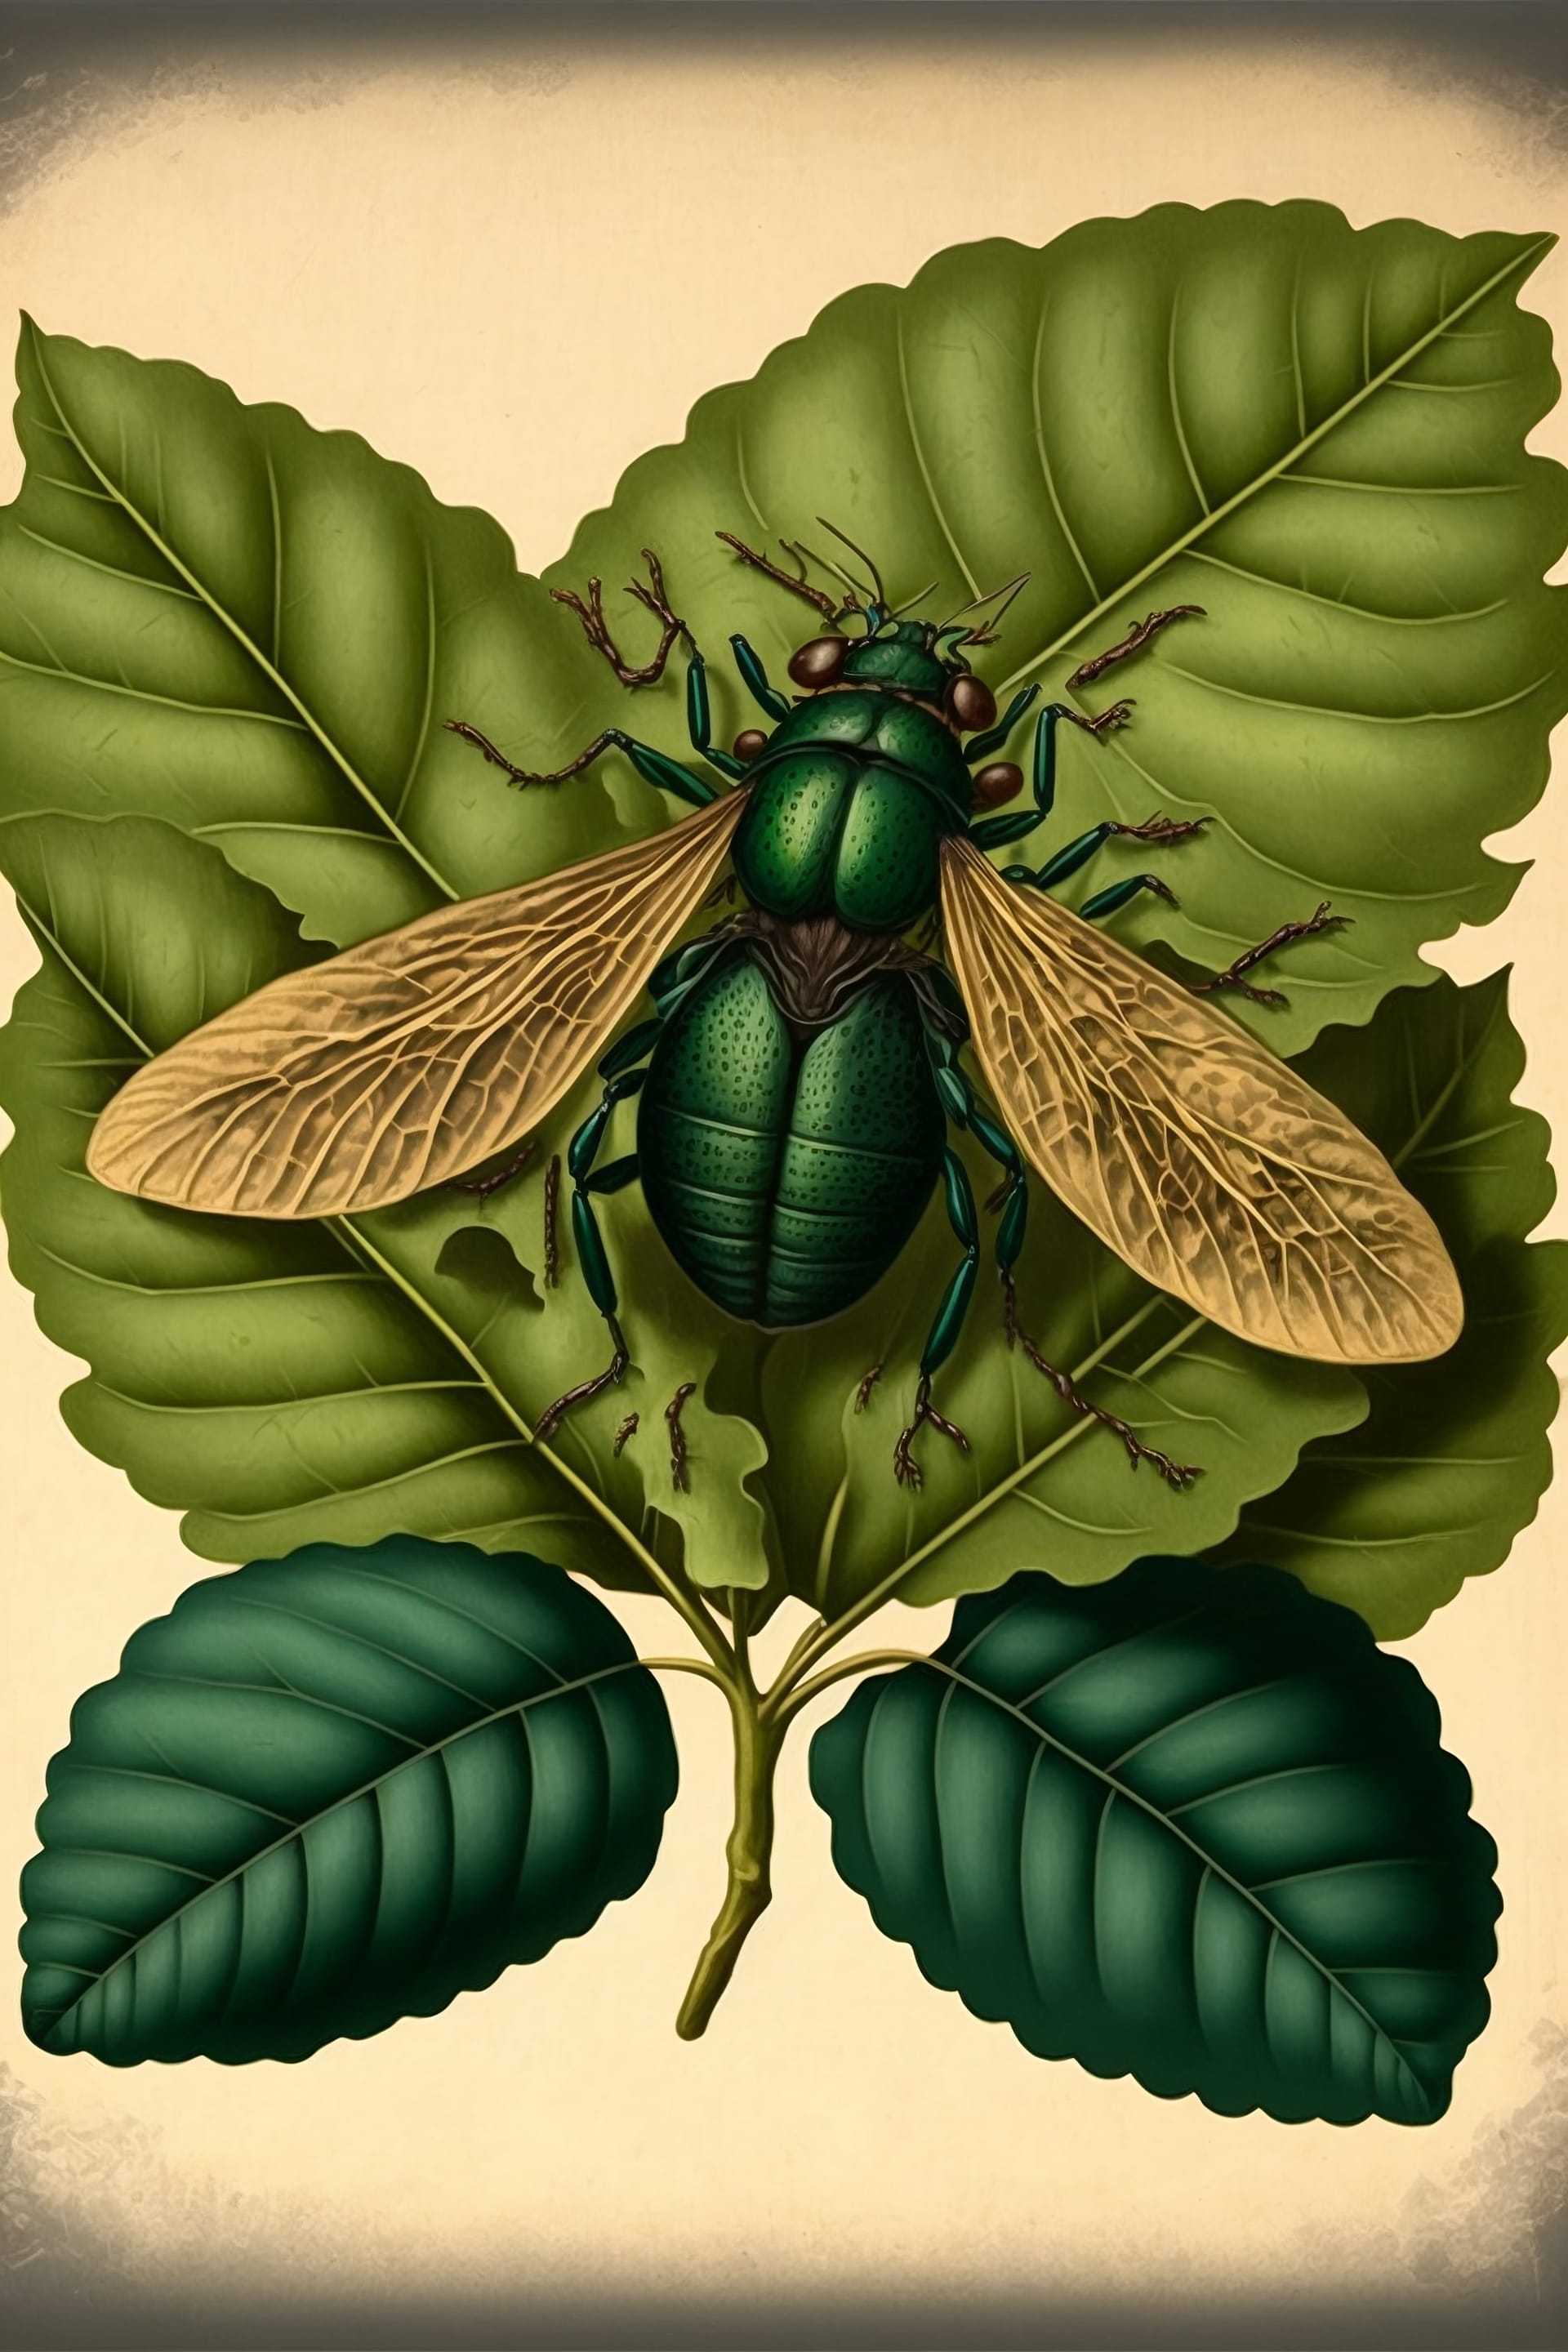 Insect fly green leaf creative digital painting